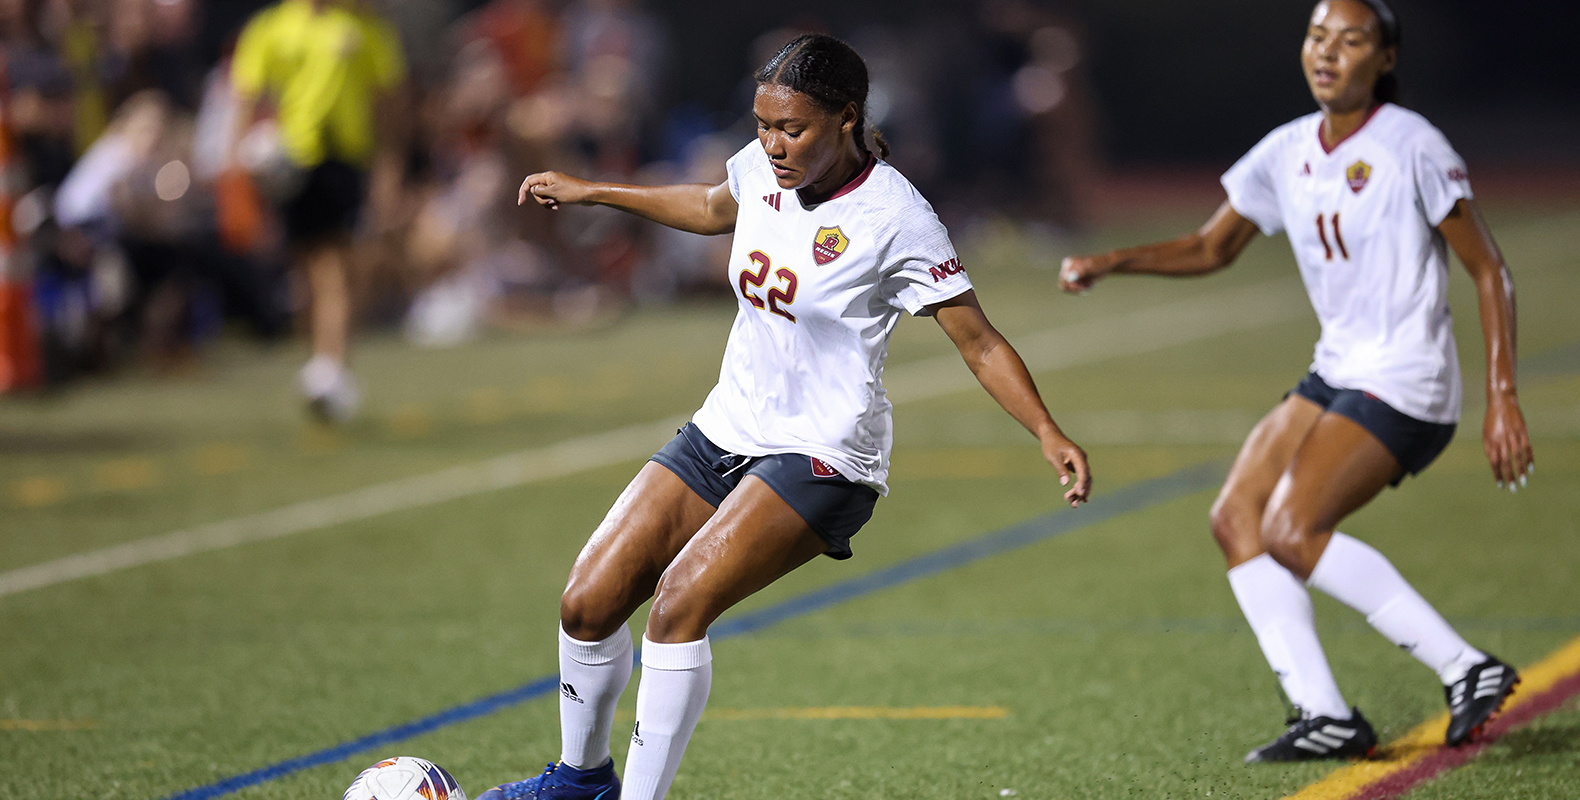 Women’s Soccer Sees Rainy Match End in 1-1 Tie